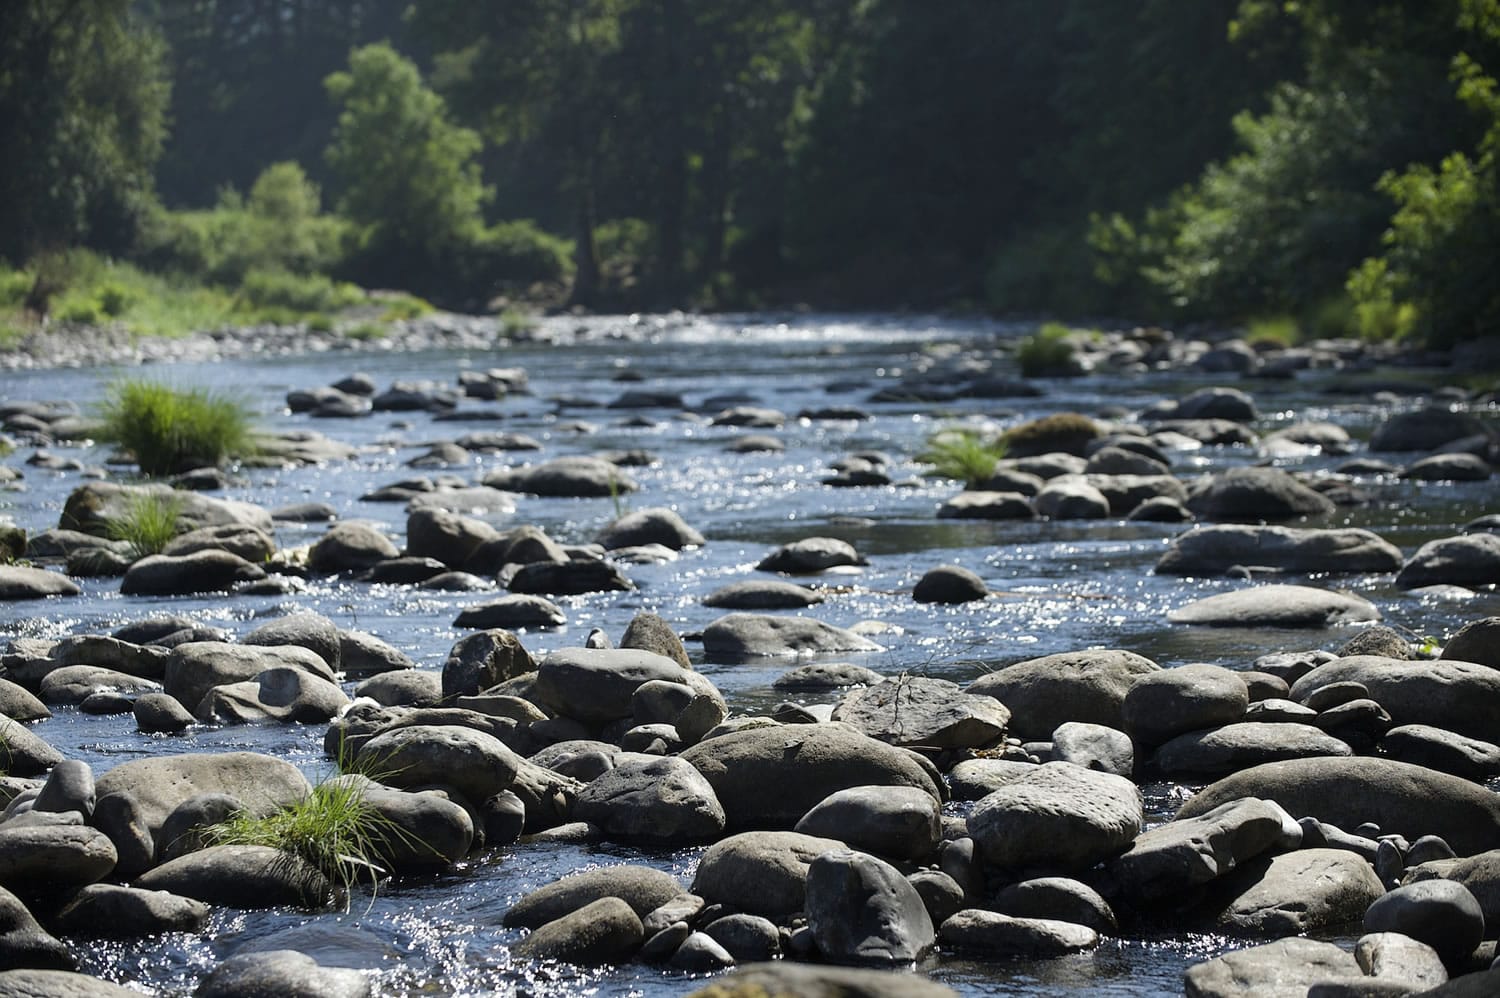 The Washougal River, shown here in late June, is among the waterways being watched closely due to high water temperatures and low flows amid drought conditions.